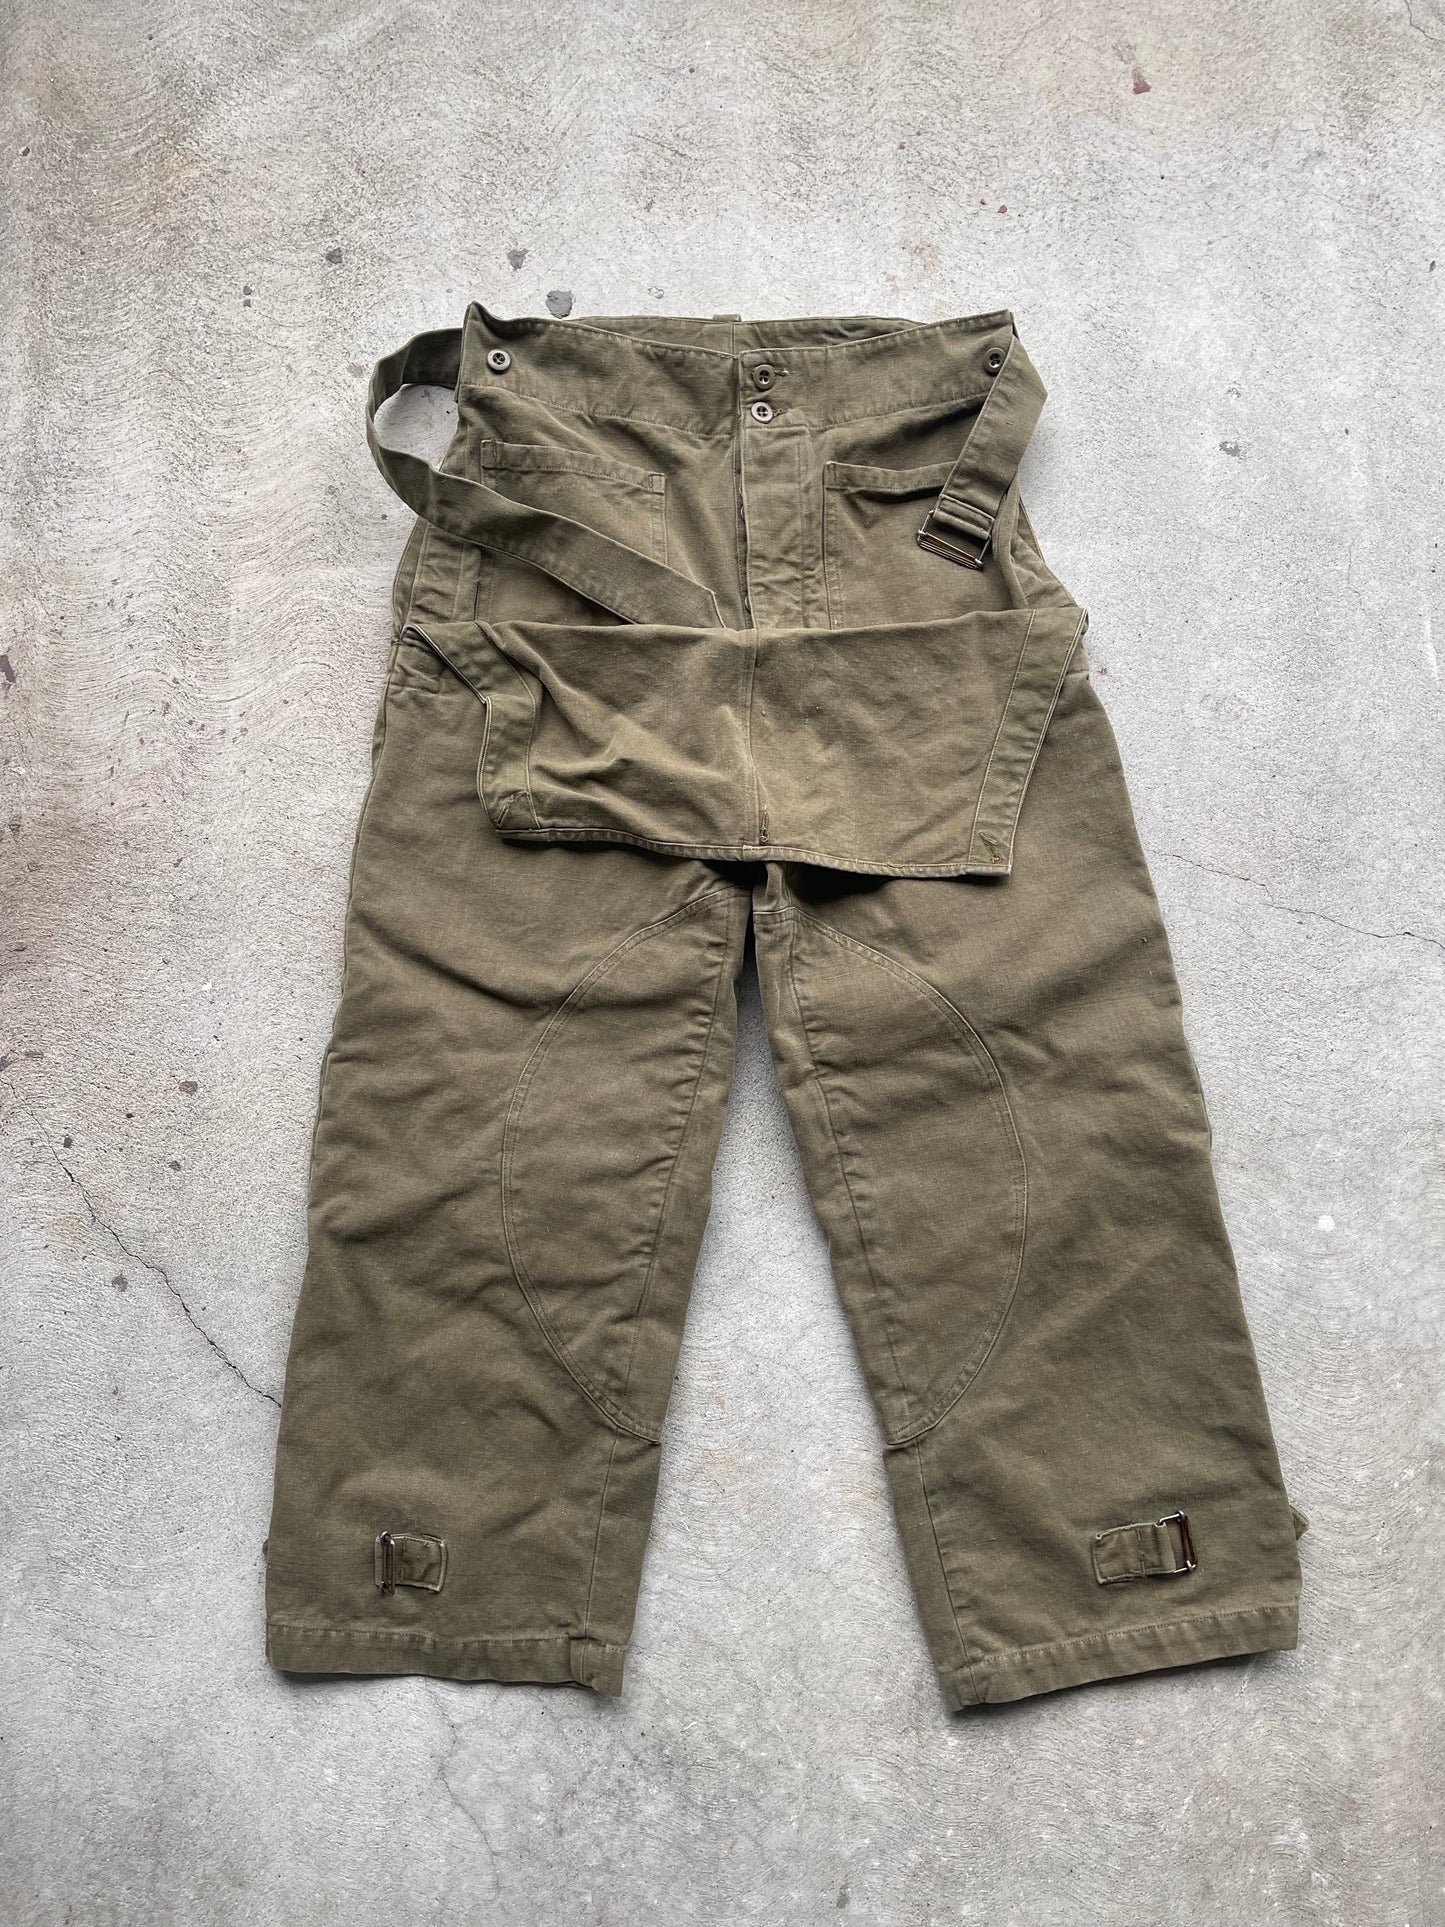 Vintage 30s/40s era French Military Motorcycle Pants 02 - M/L